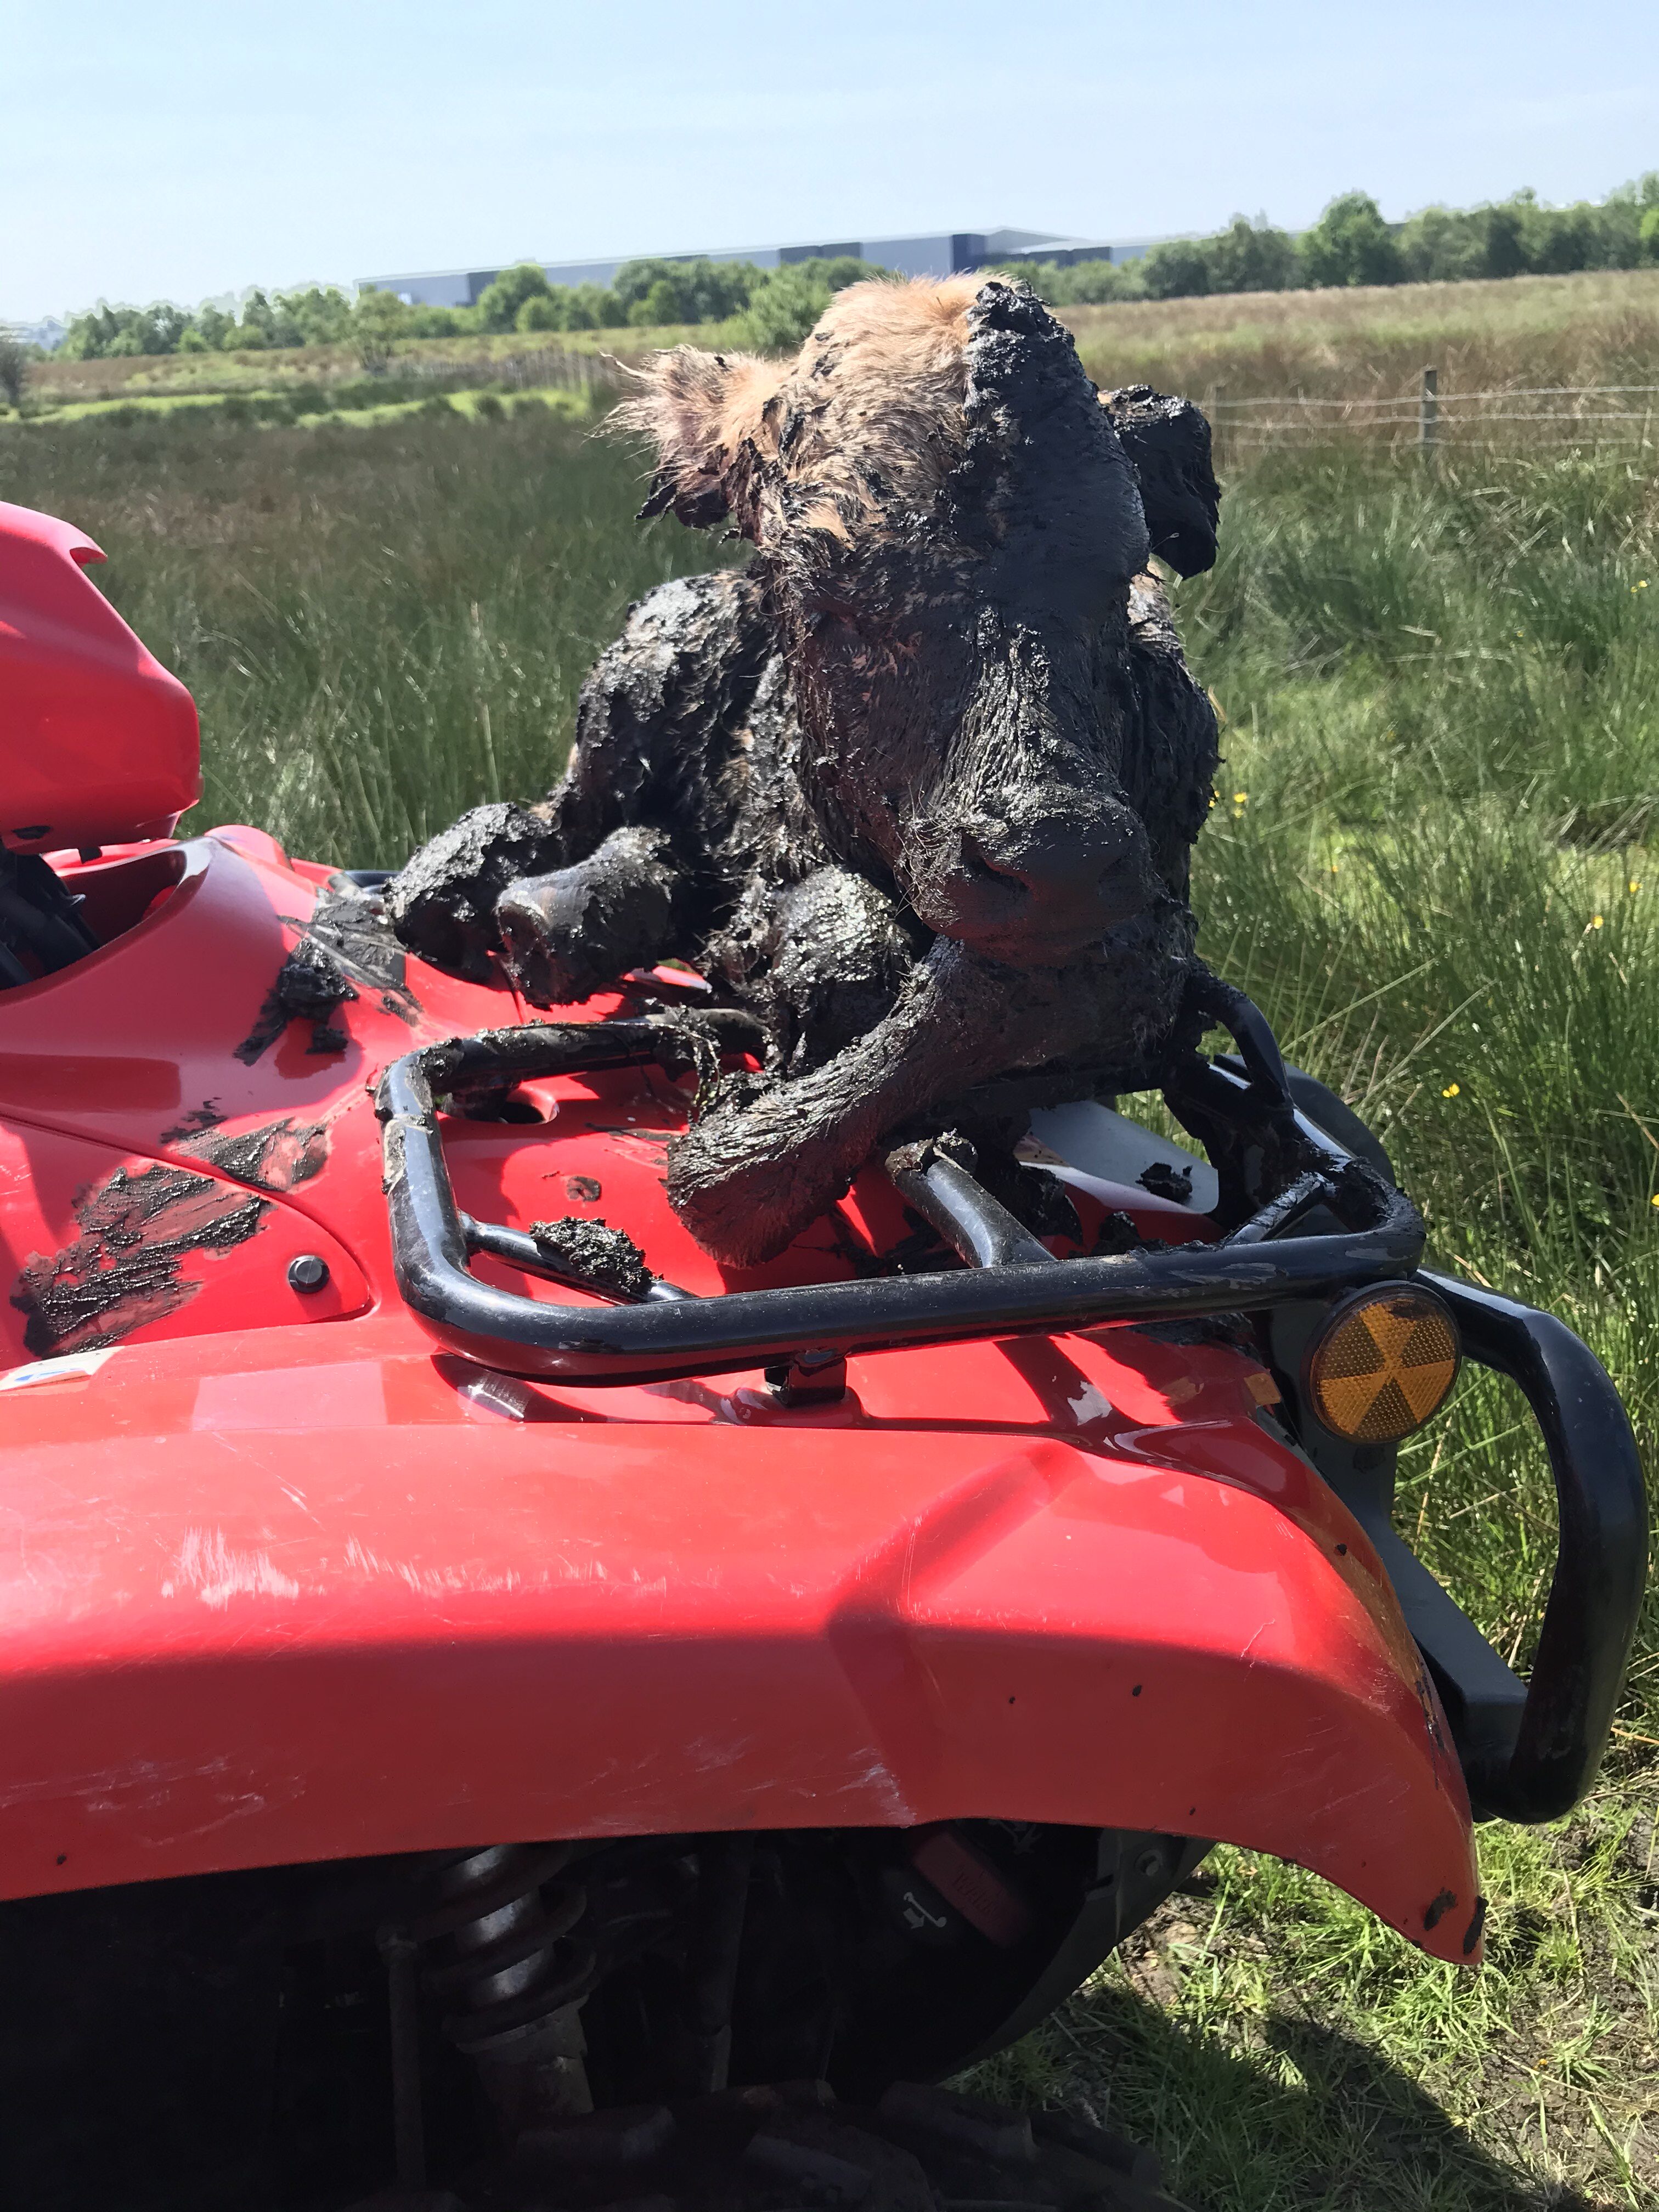 The calf got a ride on the back of the farmer's quad bike